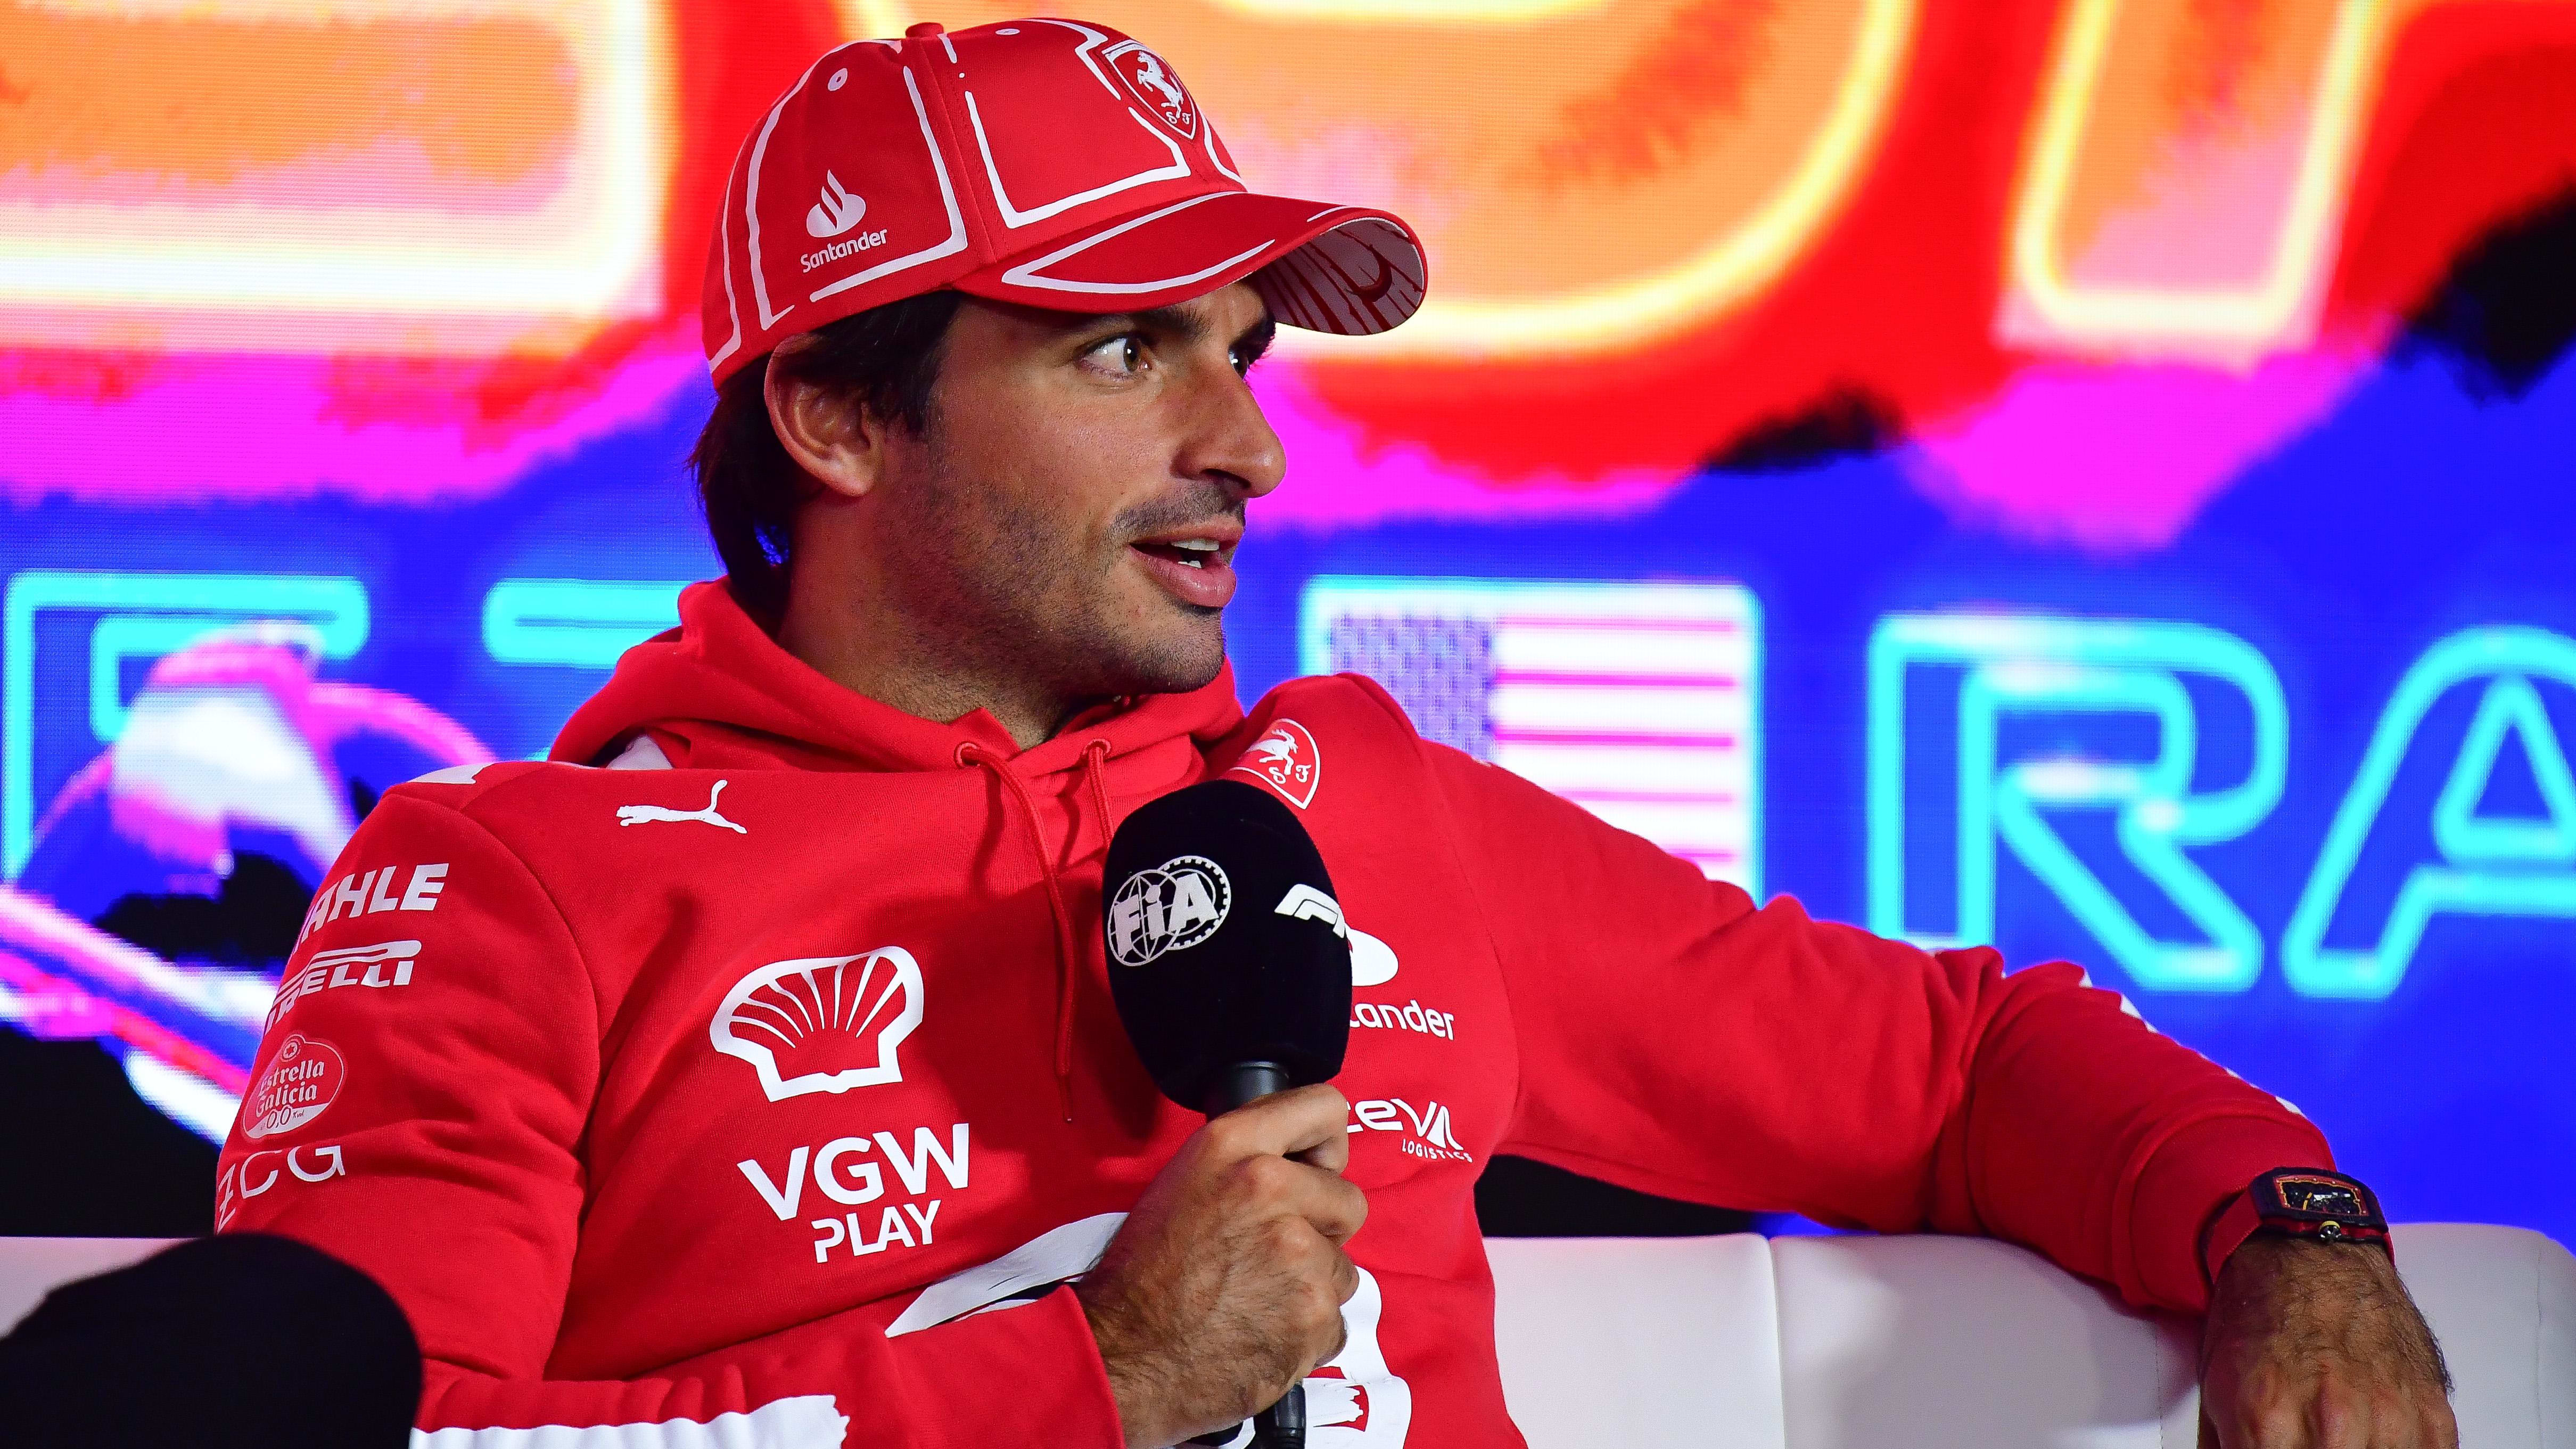 Carlos Sainz Adds Fuel to Fire of Rumors With New Team